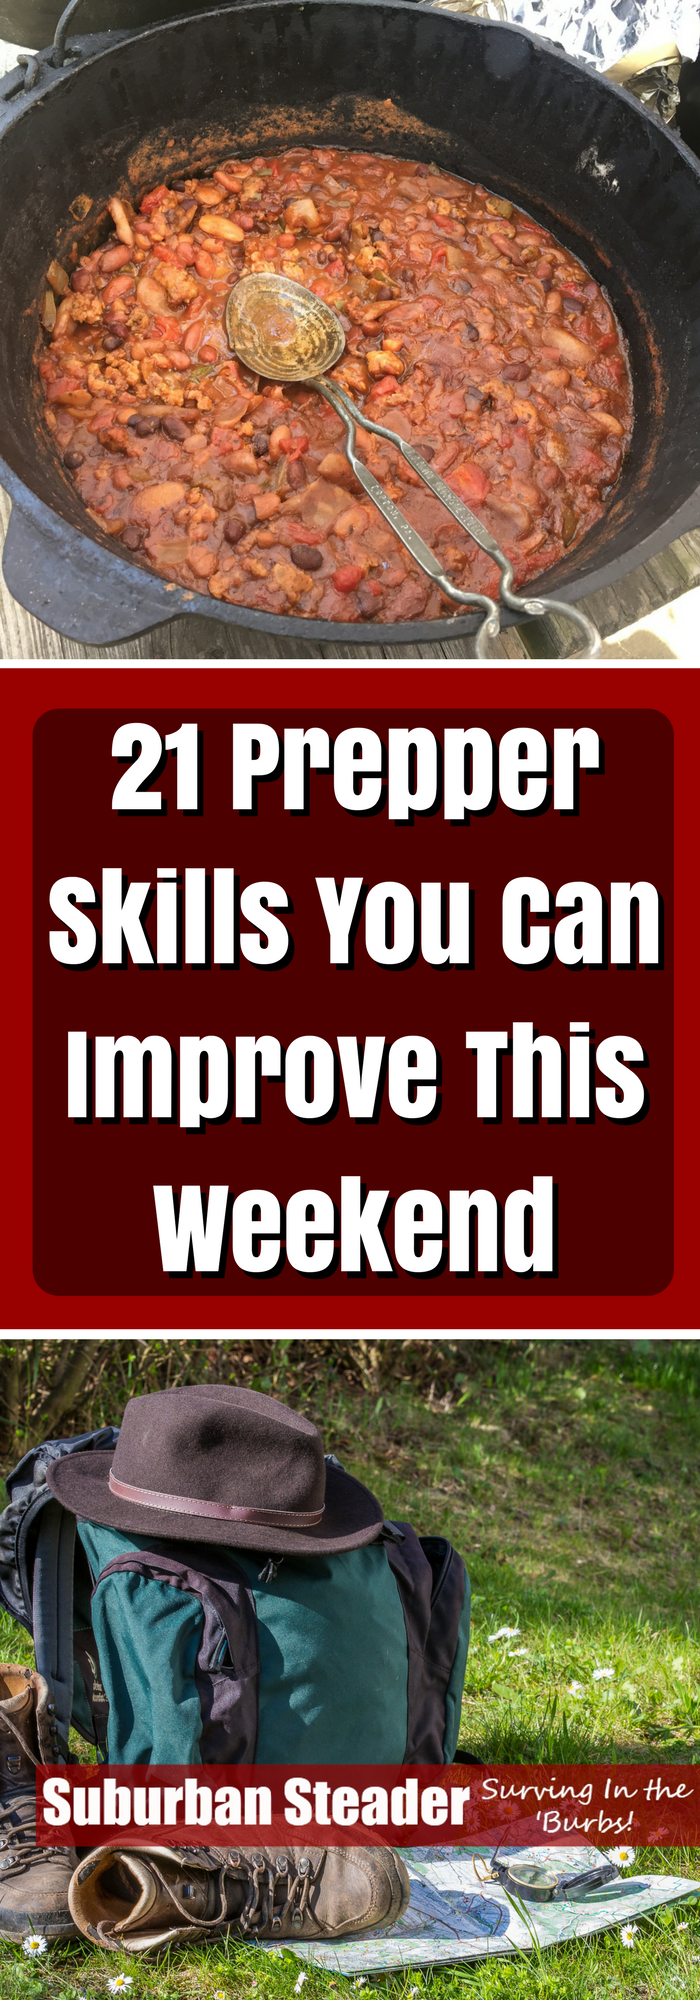 21 Prepper Skills You Can Improve This Weekend